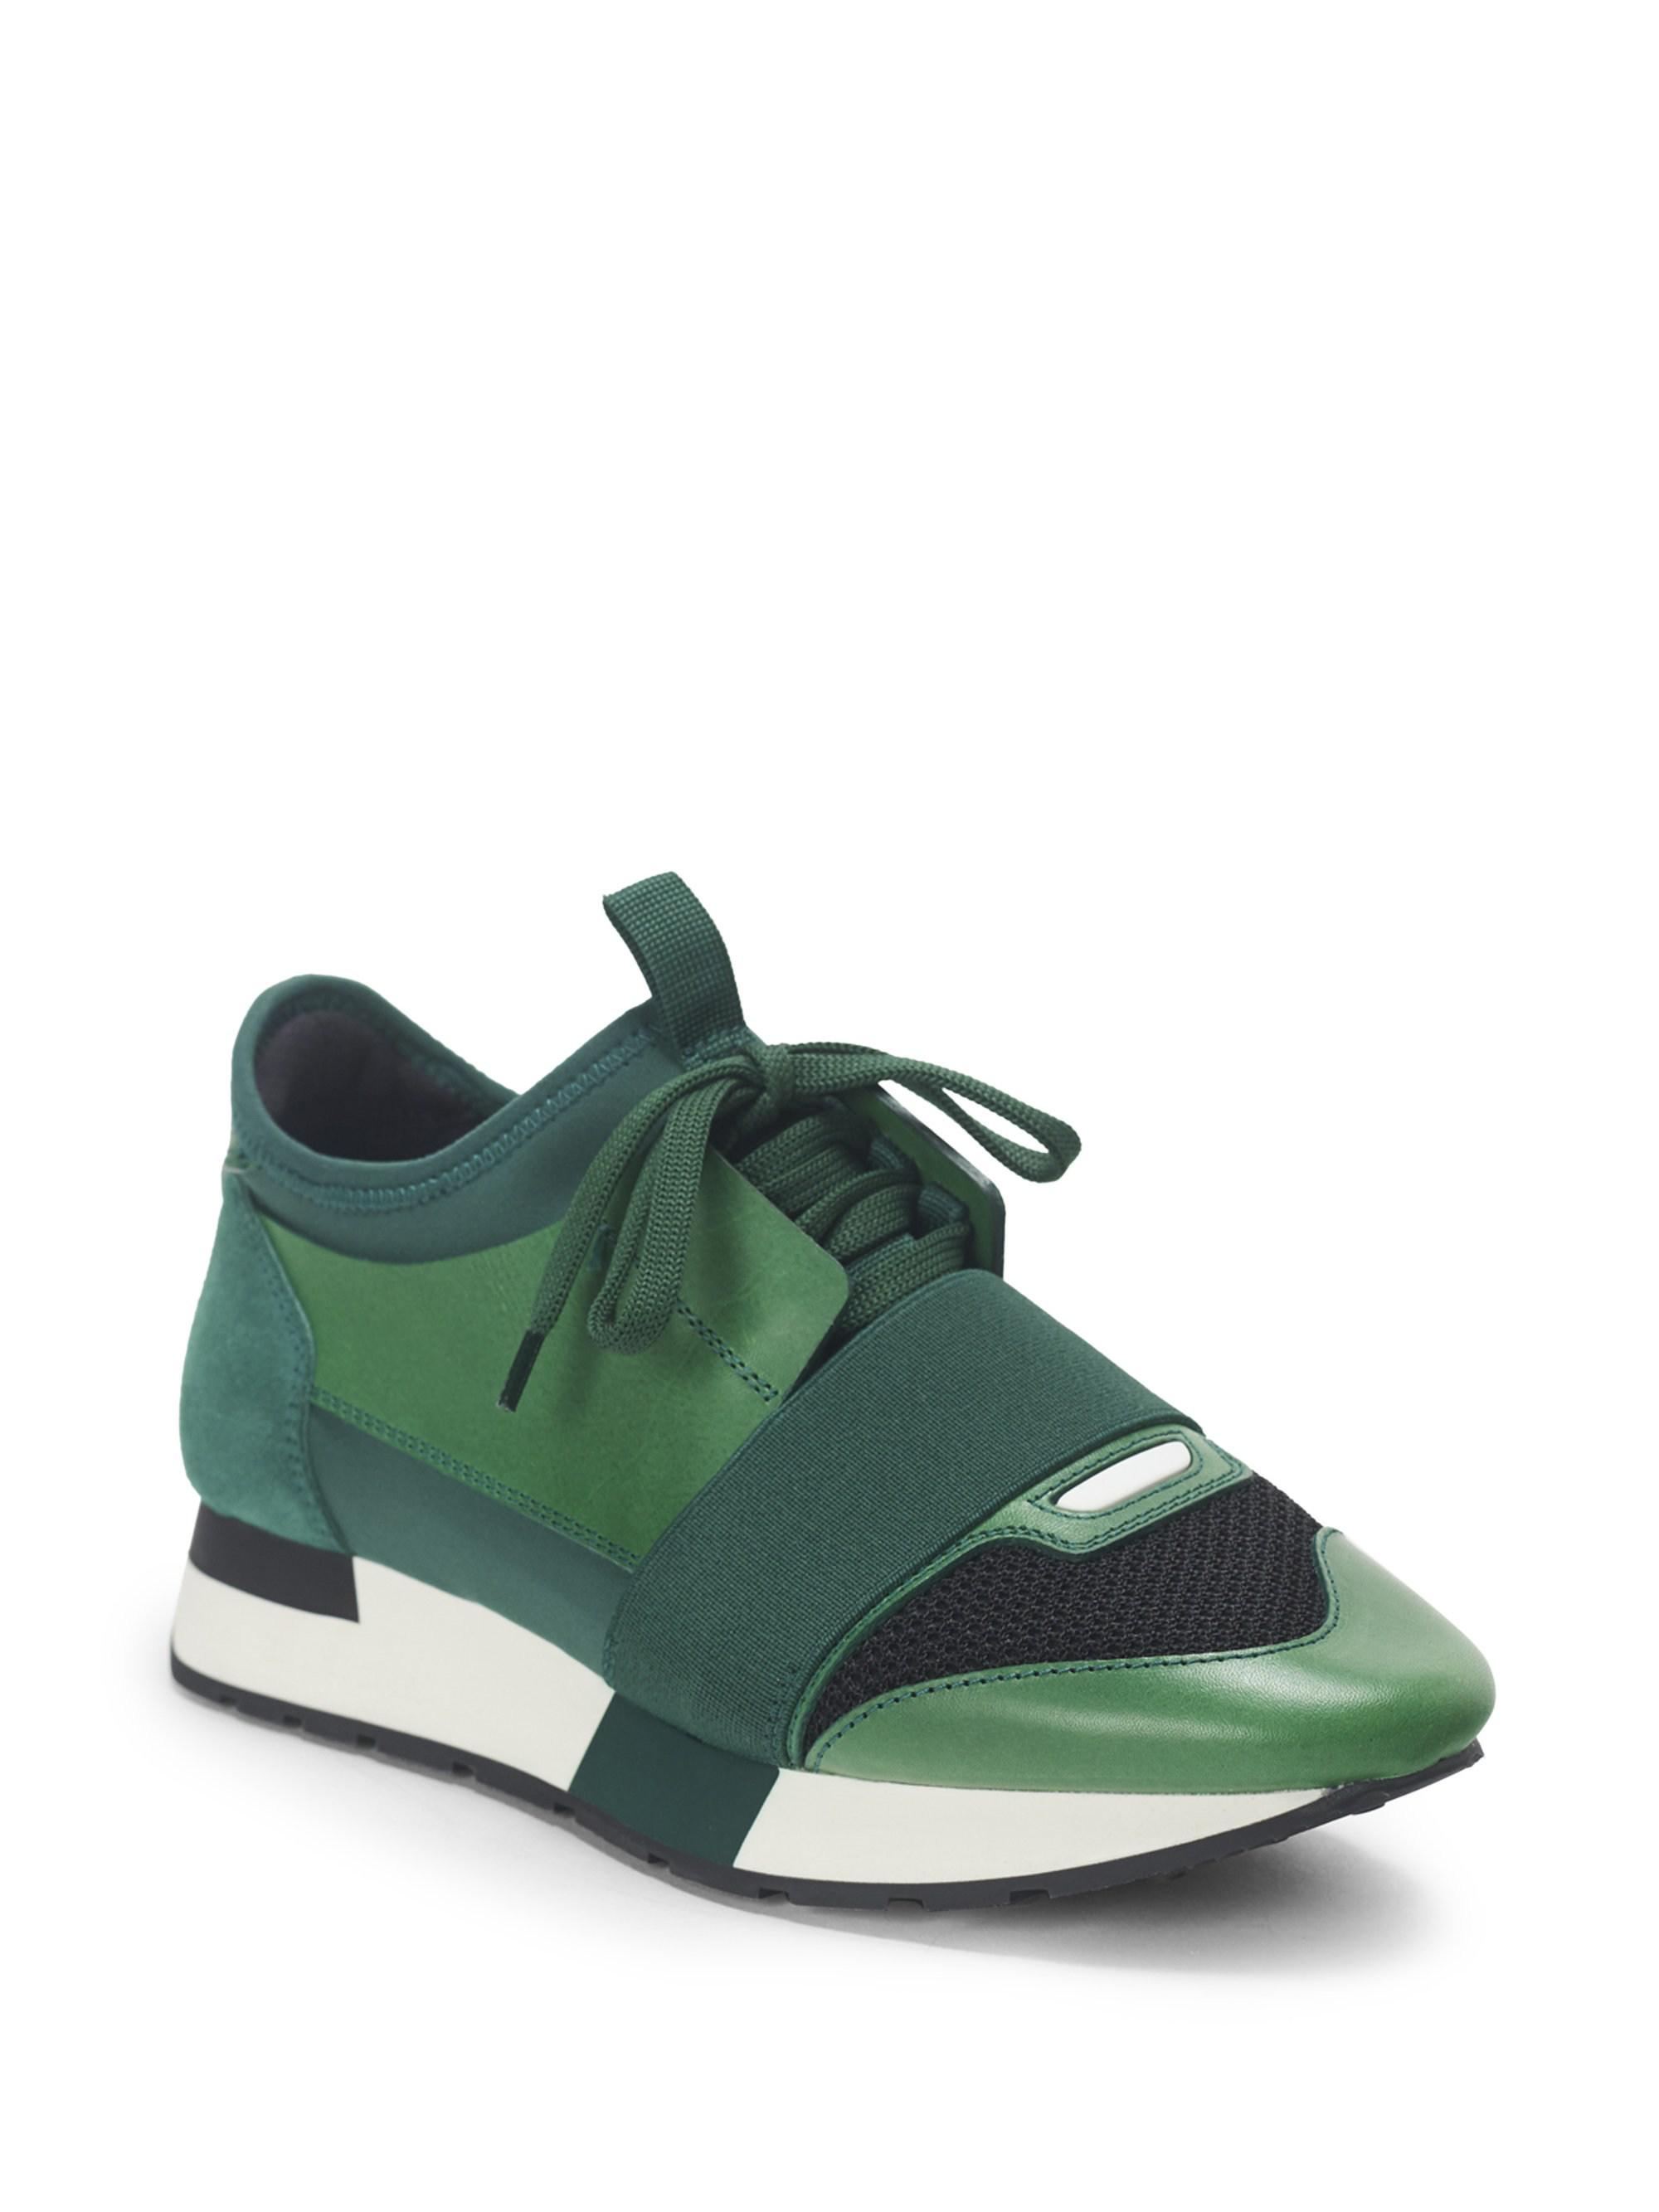 Balenciaga Leather Race Runner Sneakers in Green - Lyst